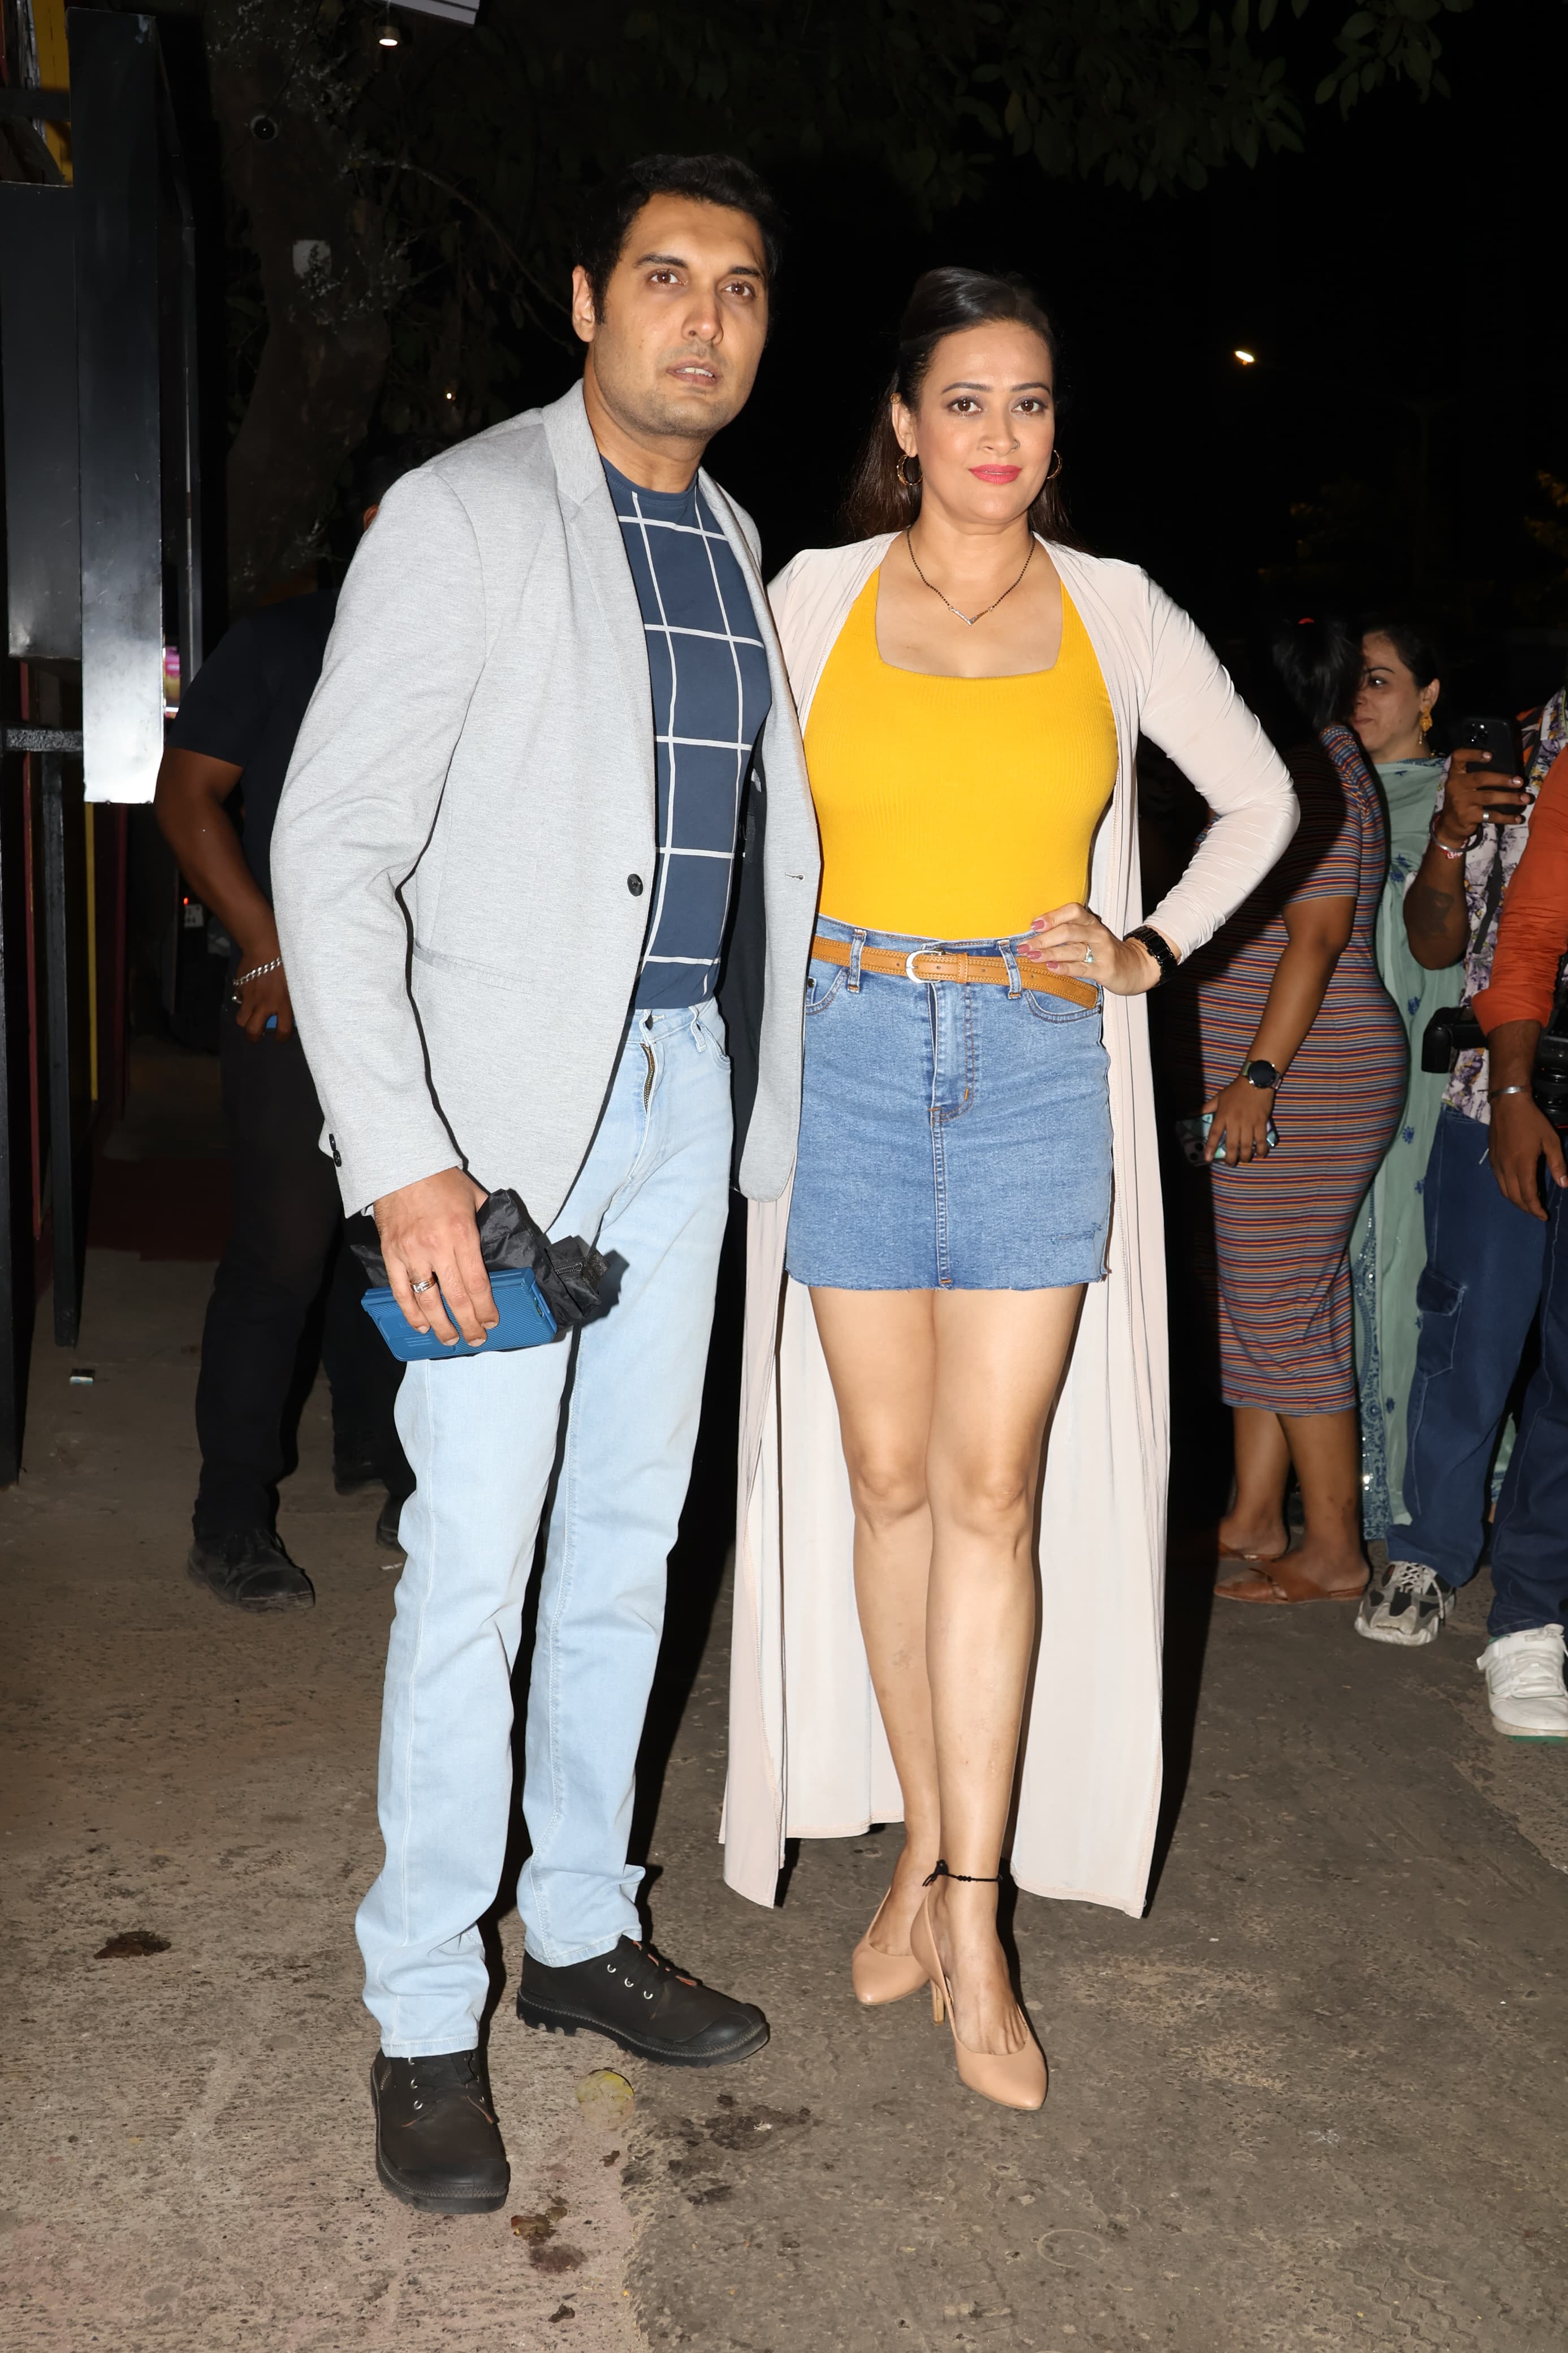 Jaswin Kaur stunned in a yellow top, blue shorts and white shrug as she arrived at Rupali Ganguly's birthday bash